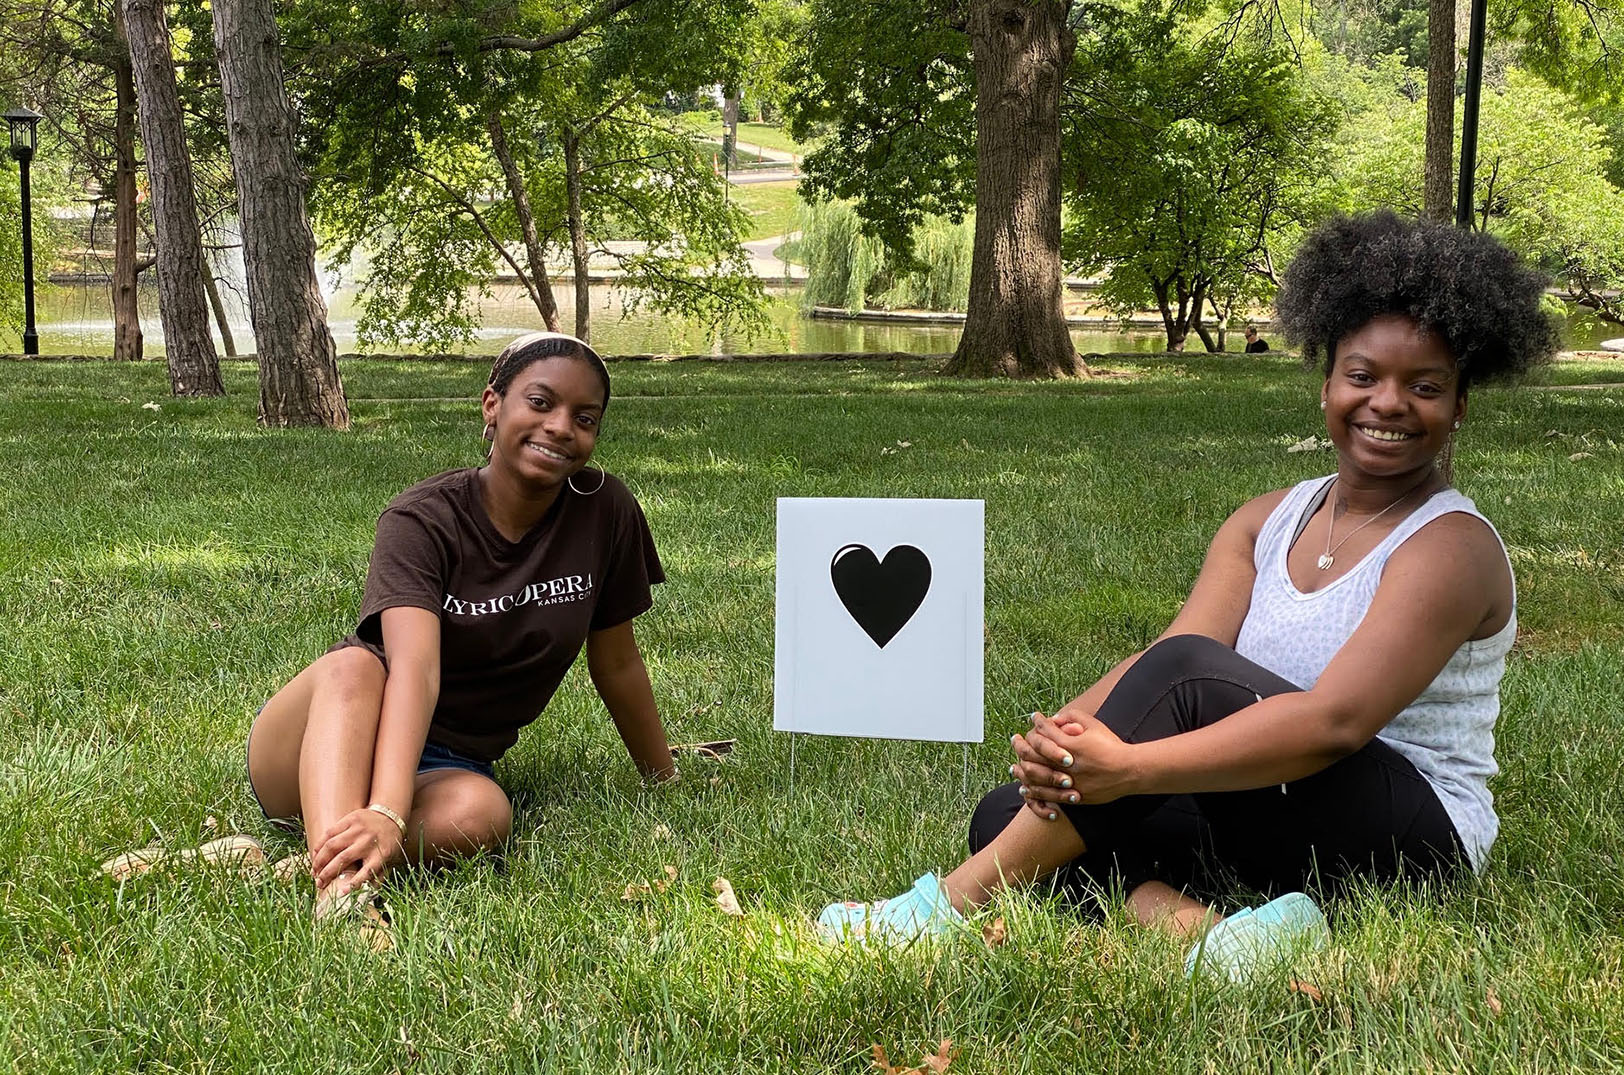 Start with heart: Sisters’ yard signs offer a ‘stepping stone’ to support Black lives